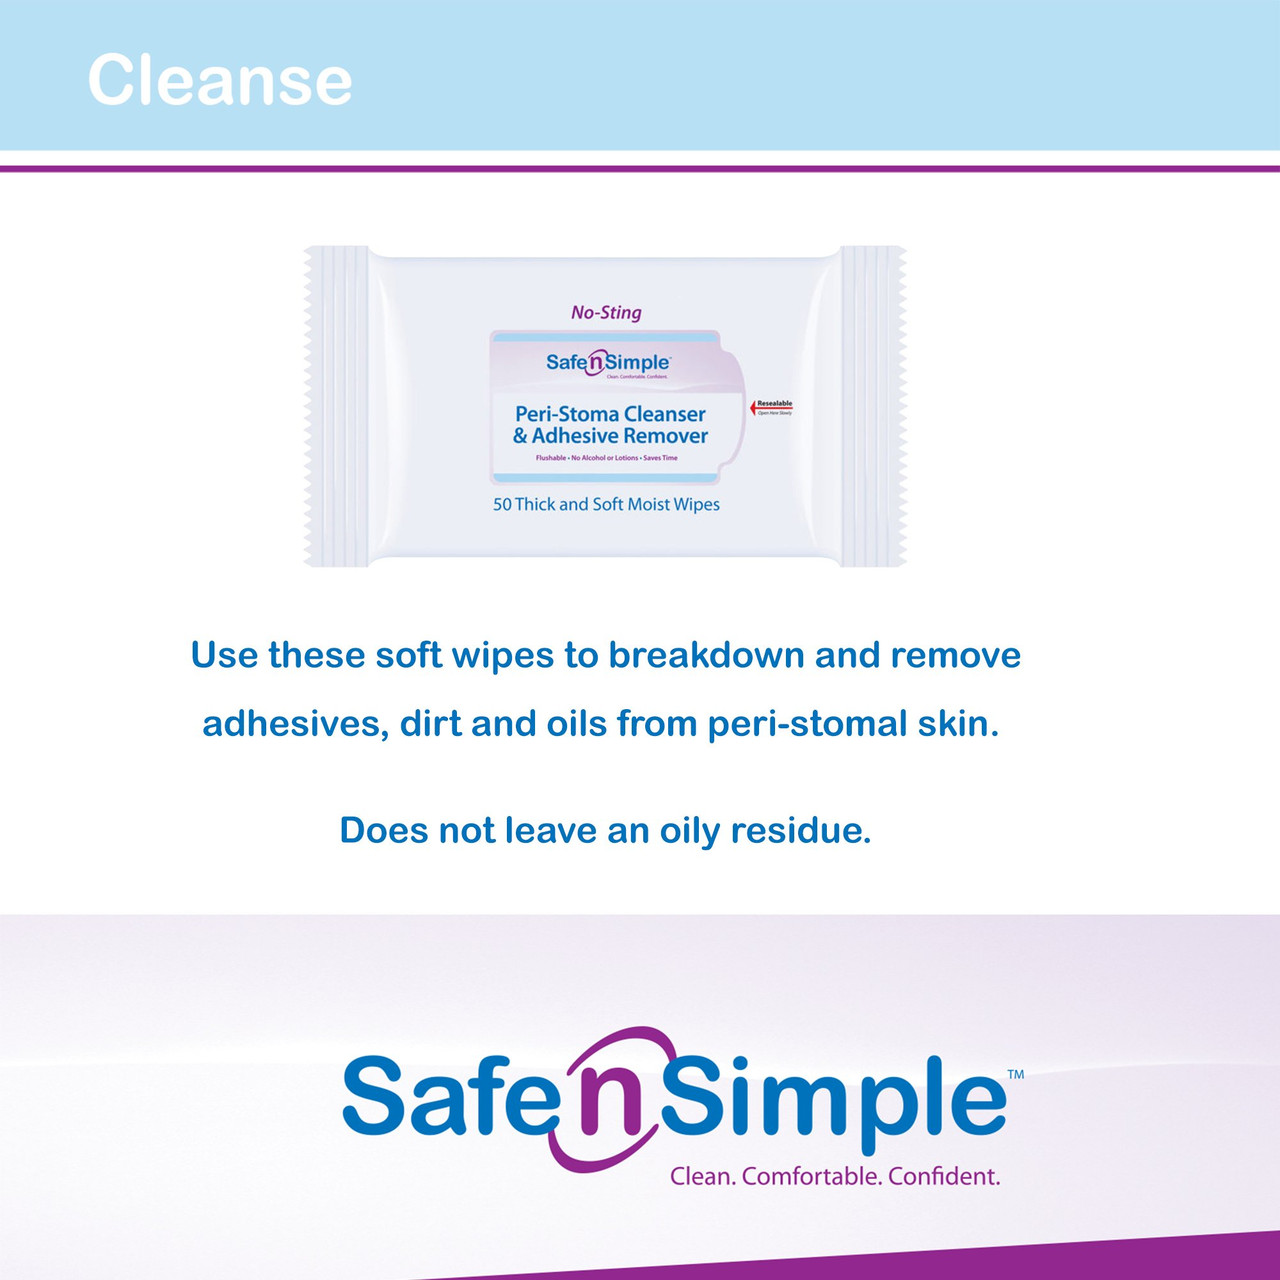 Alcohol Free Adhesive Remover | Peri-Stoma Cleansers | Skin cleanser